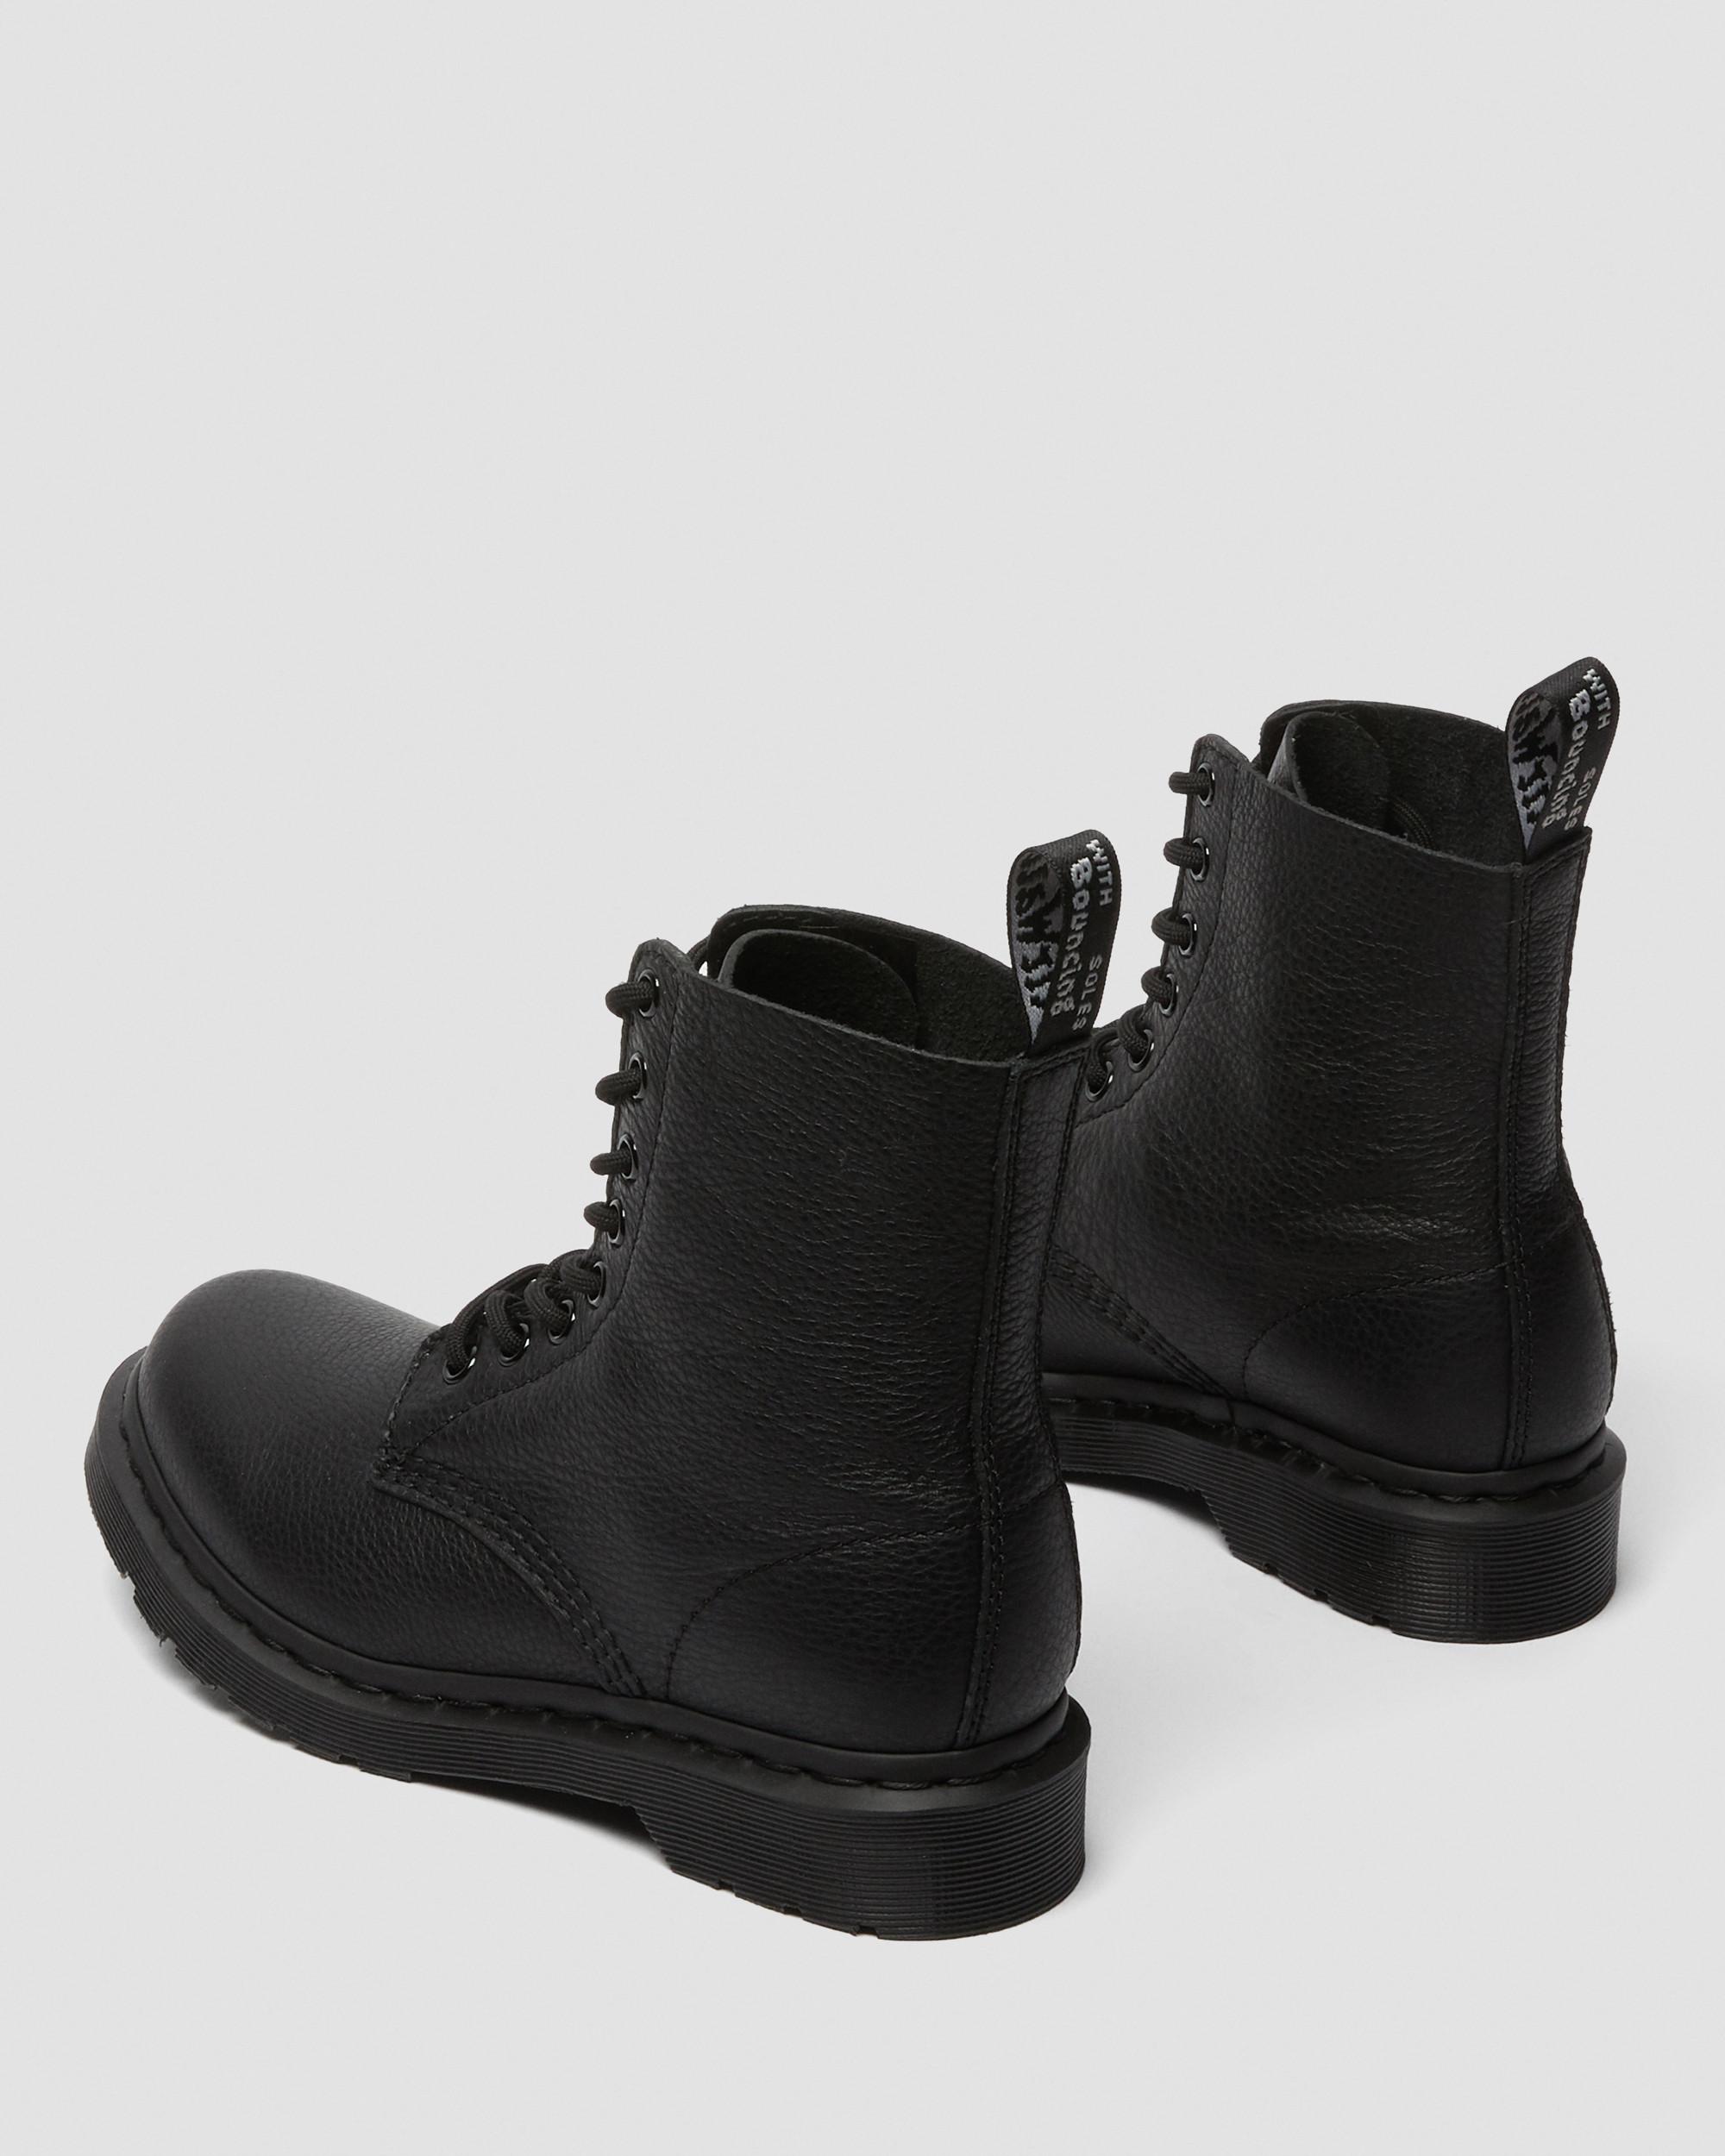 1460 Pascal Women's Mono Lace Up Boots in Black